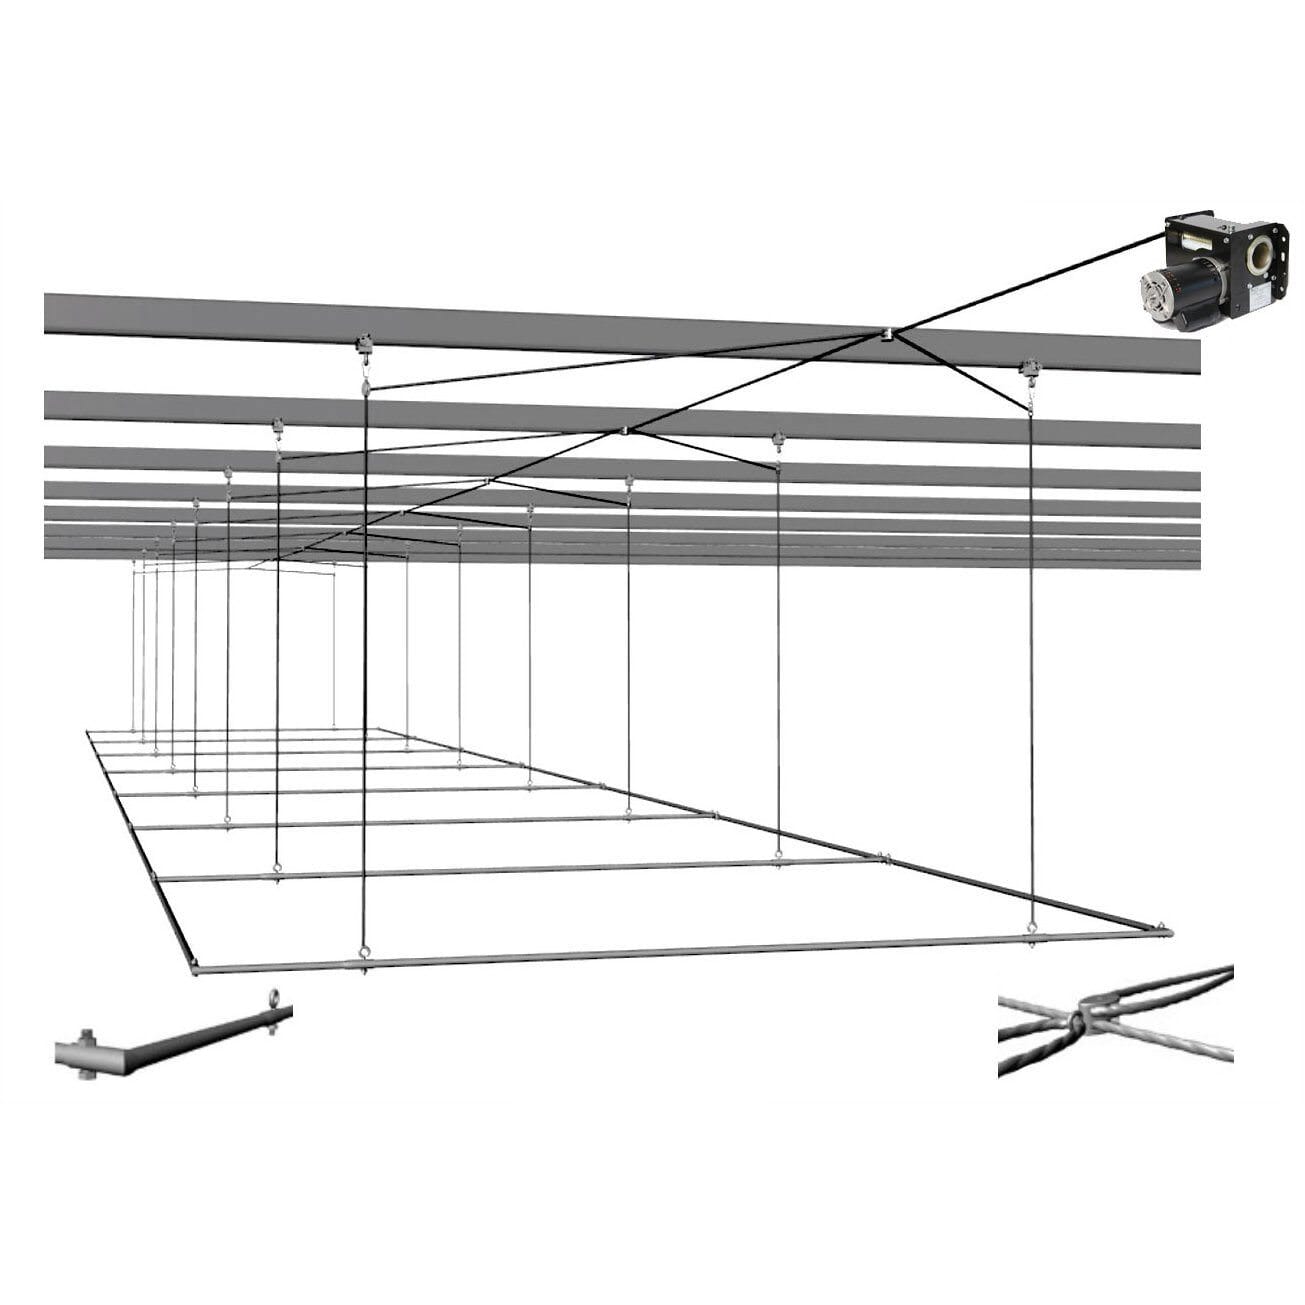 55' - 70' Suspended Air Frame Batting Cage with Winch